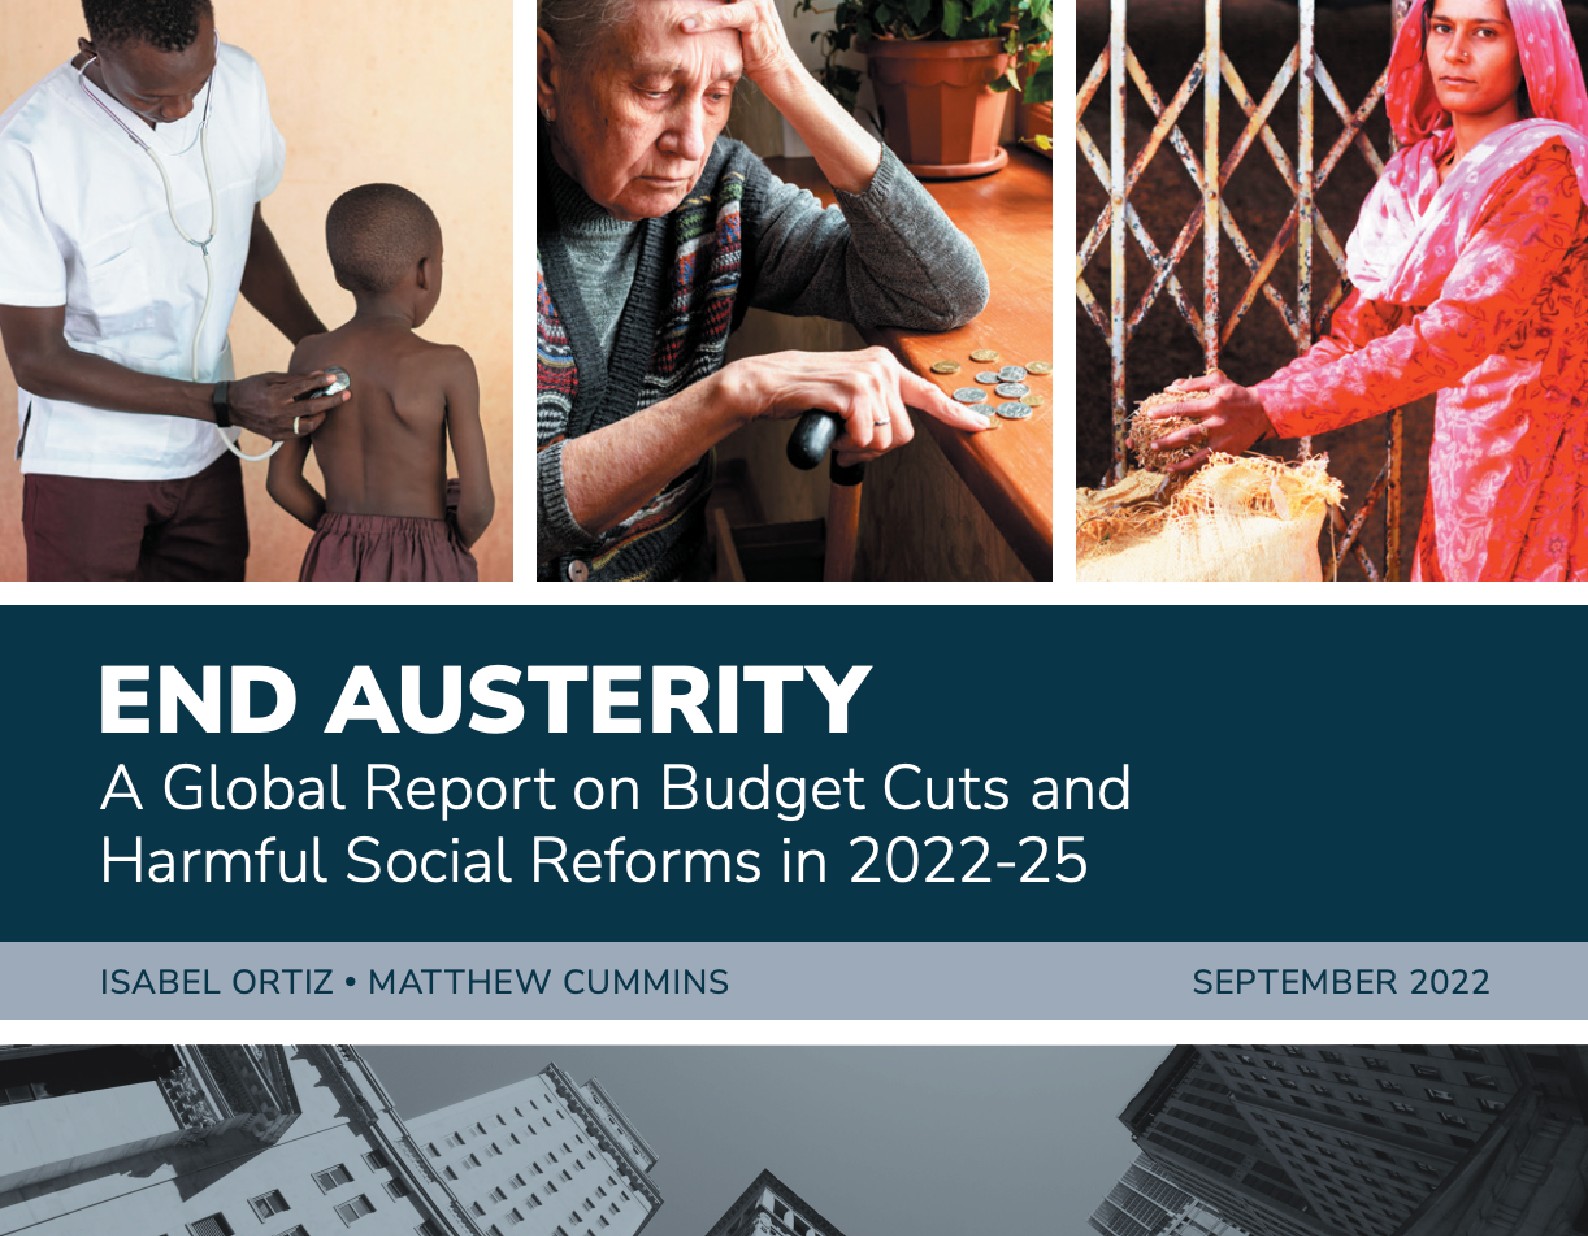 End Austerity: A Global Report on Budget Cuts and Harmful Social Reforms in 2022-25 Report by Relief Web